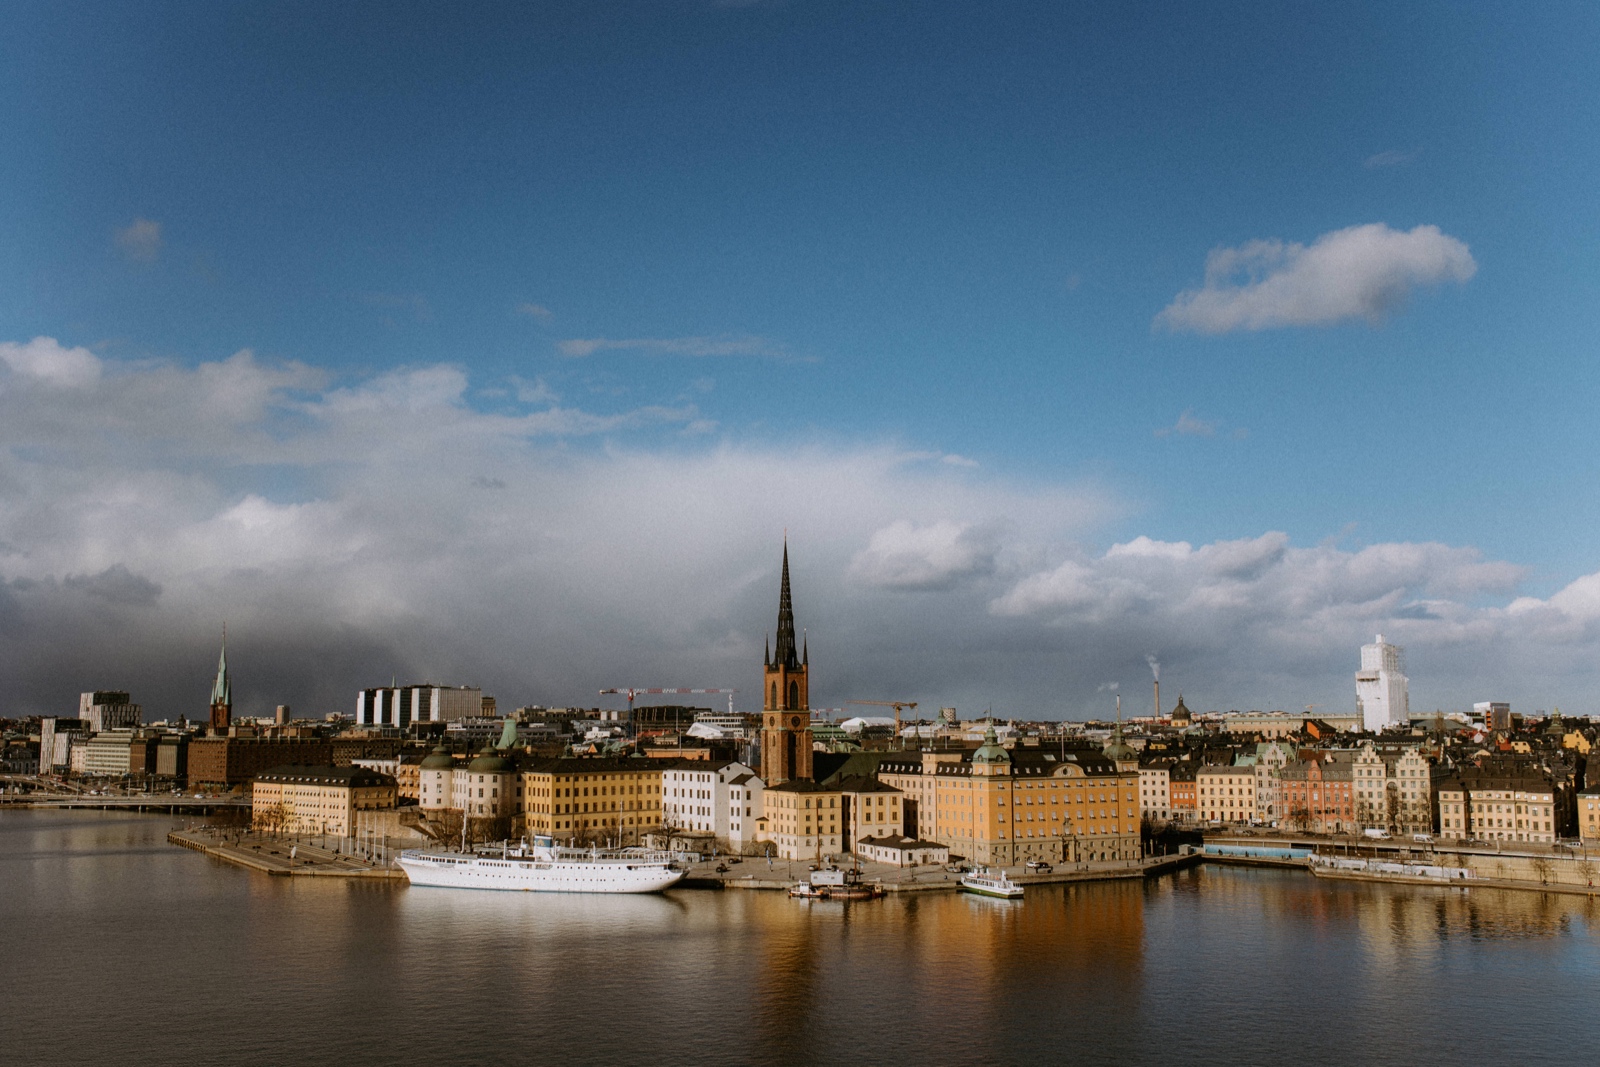 view of Stockholm from Mariatorget